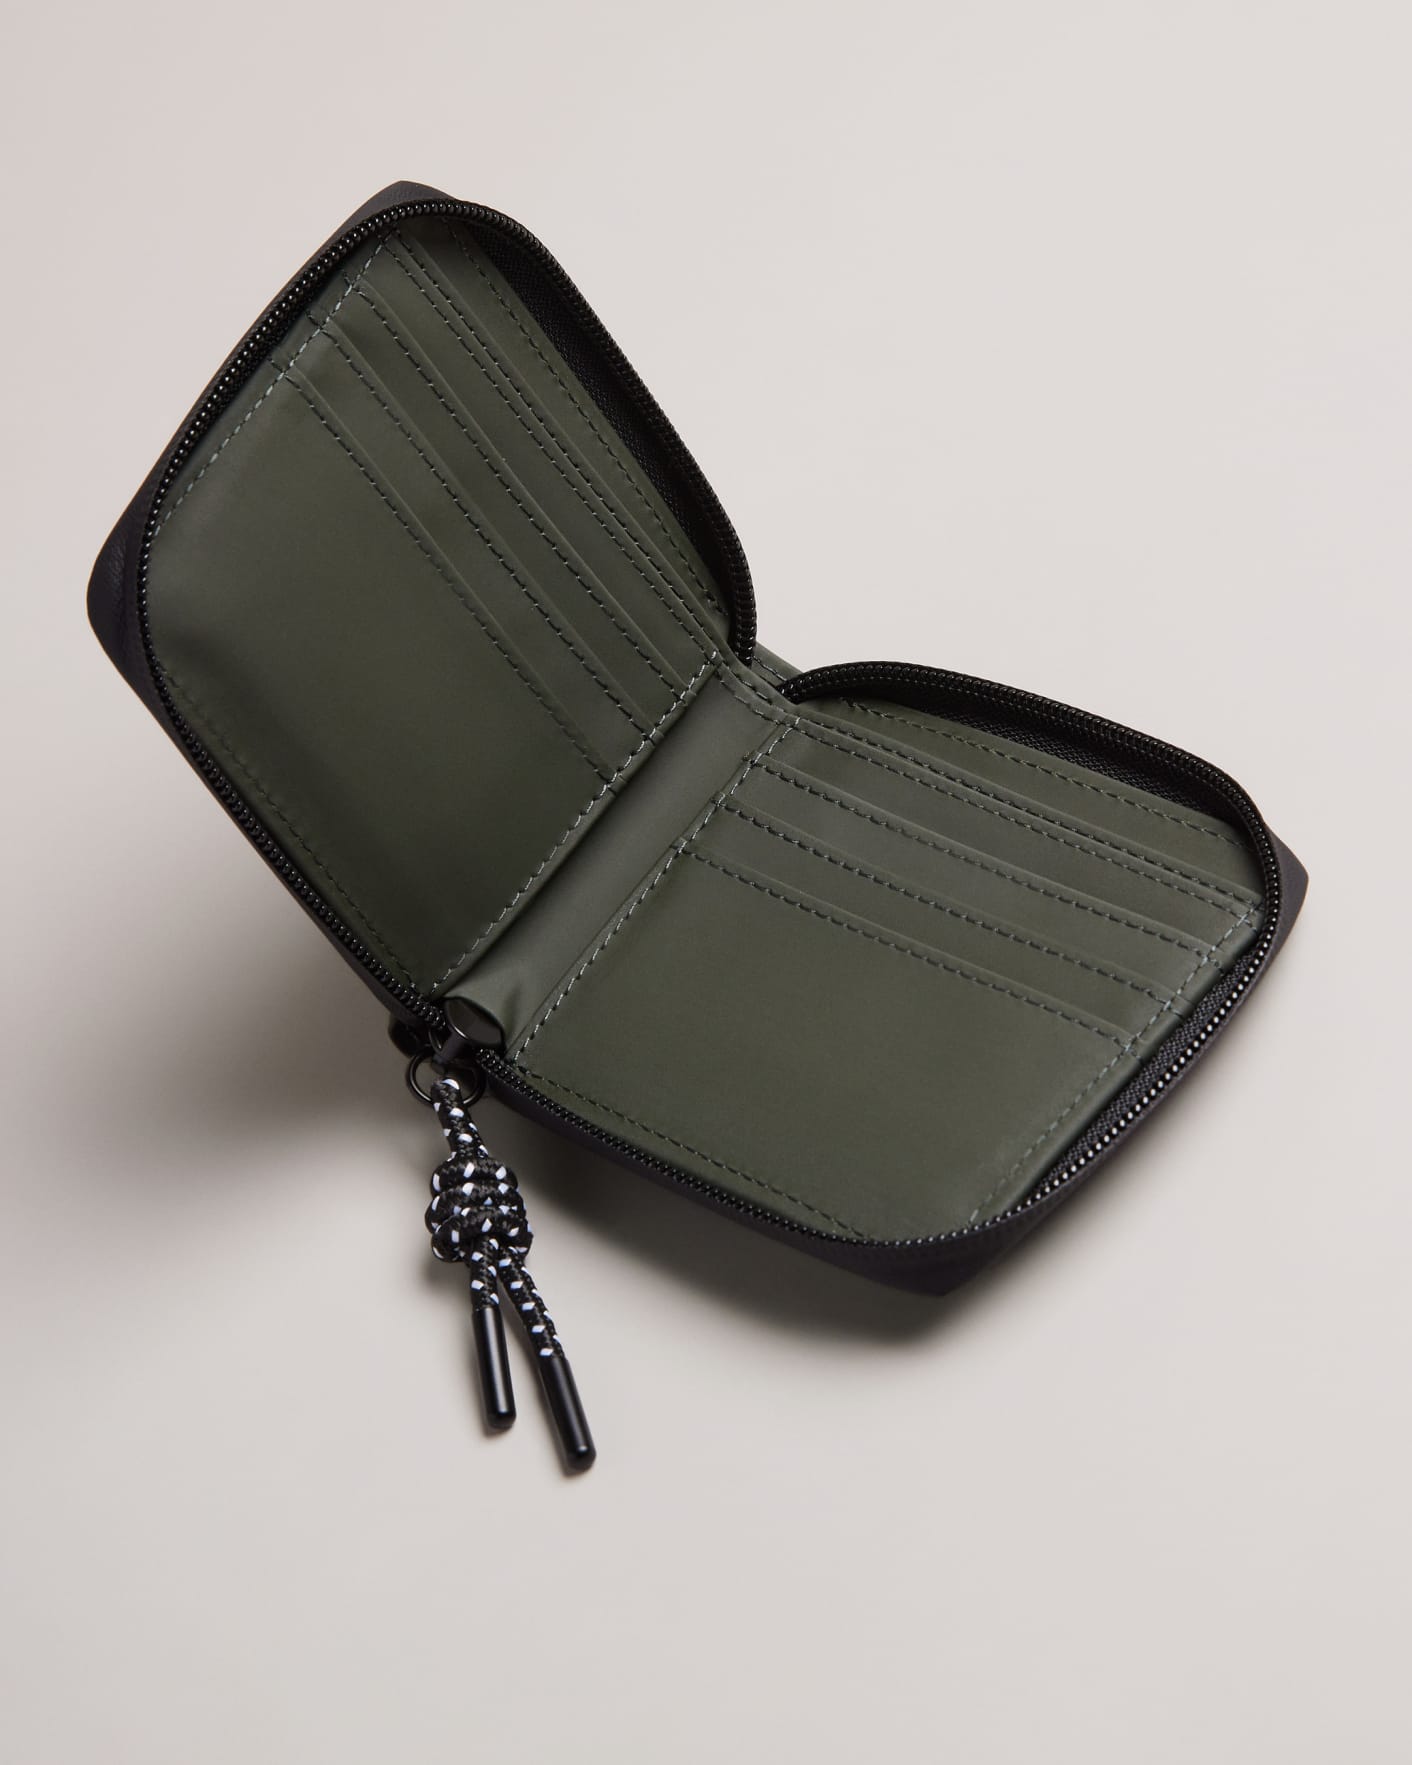 Olive Rubberised Wallet And Cardholder Giftset Ted Baker